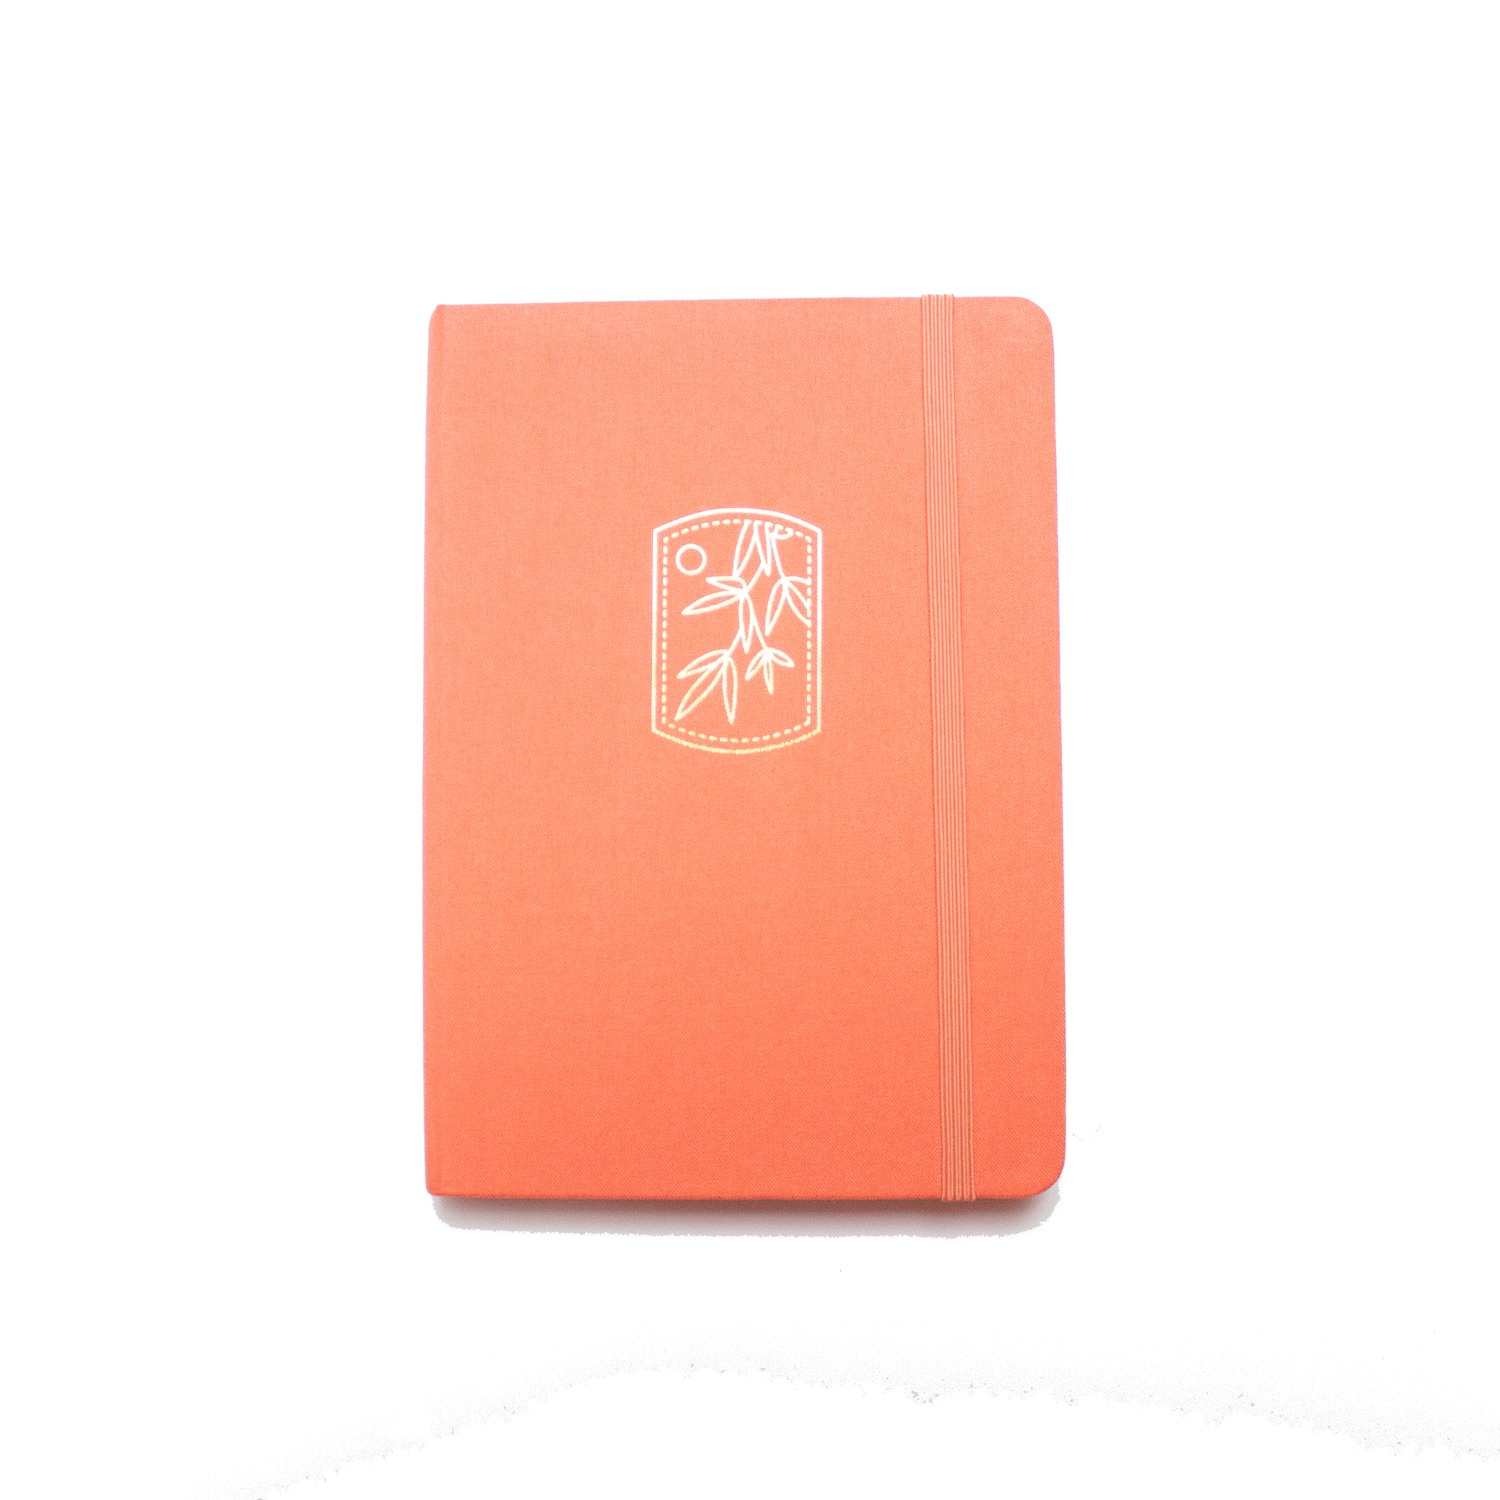 The A5 bobo BuJo Dot Grid Journal in "Tangerine" orange. A gold foil illustration of mandarin tree leaves and a sun is stamped on the front cover. A matching orange elastic closure is holding the journal closed.